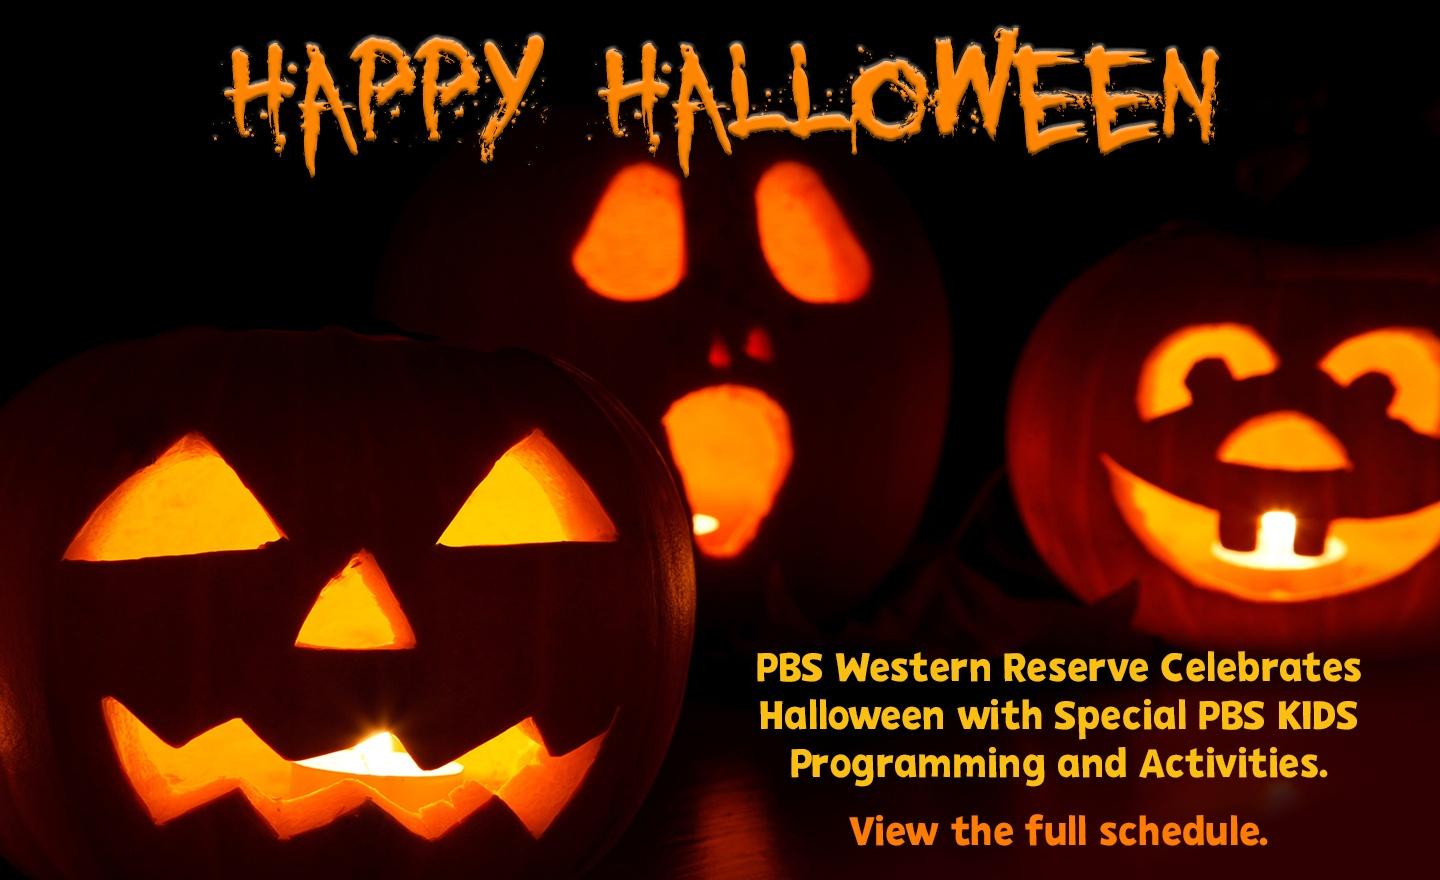 PBS Western Reserve Celebrates Halloween with Special PBS Kids Programming and Activities